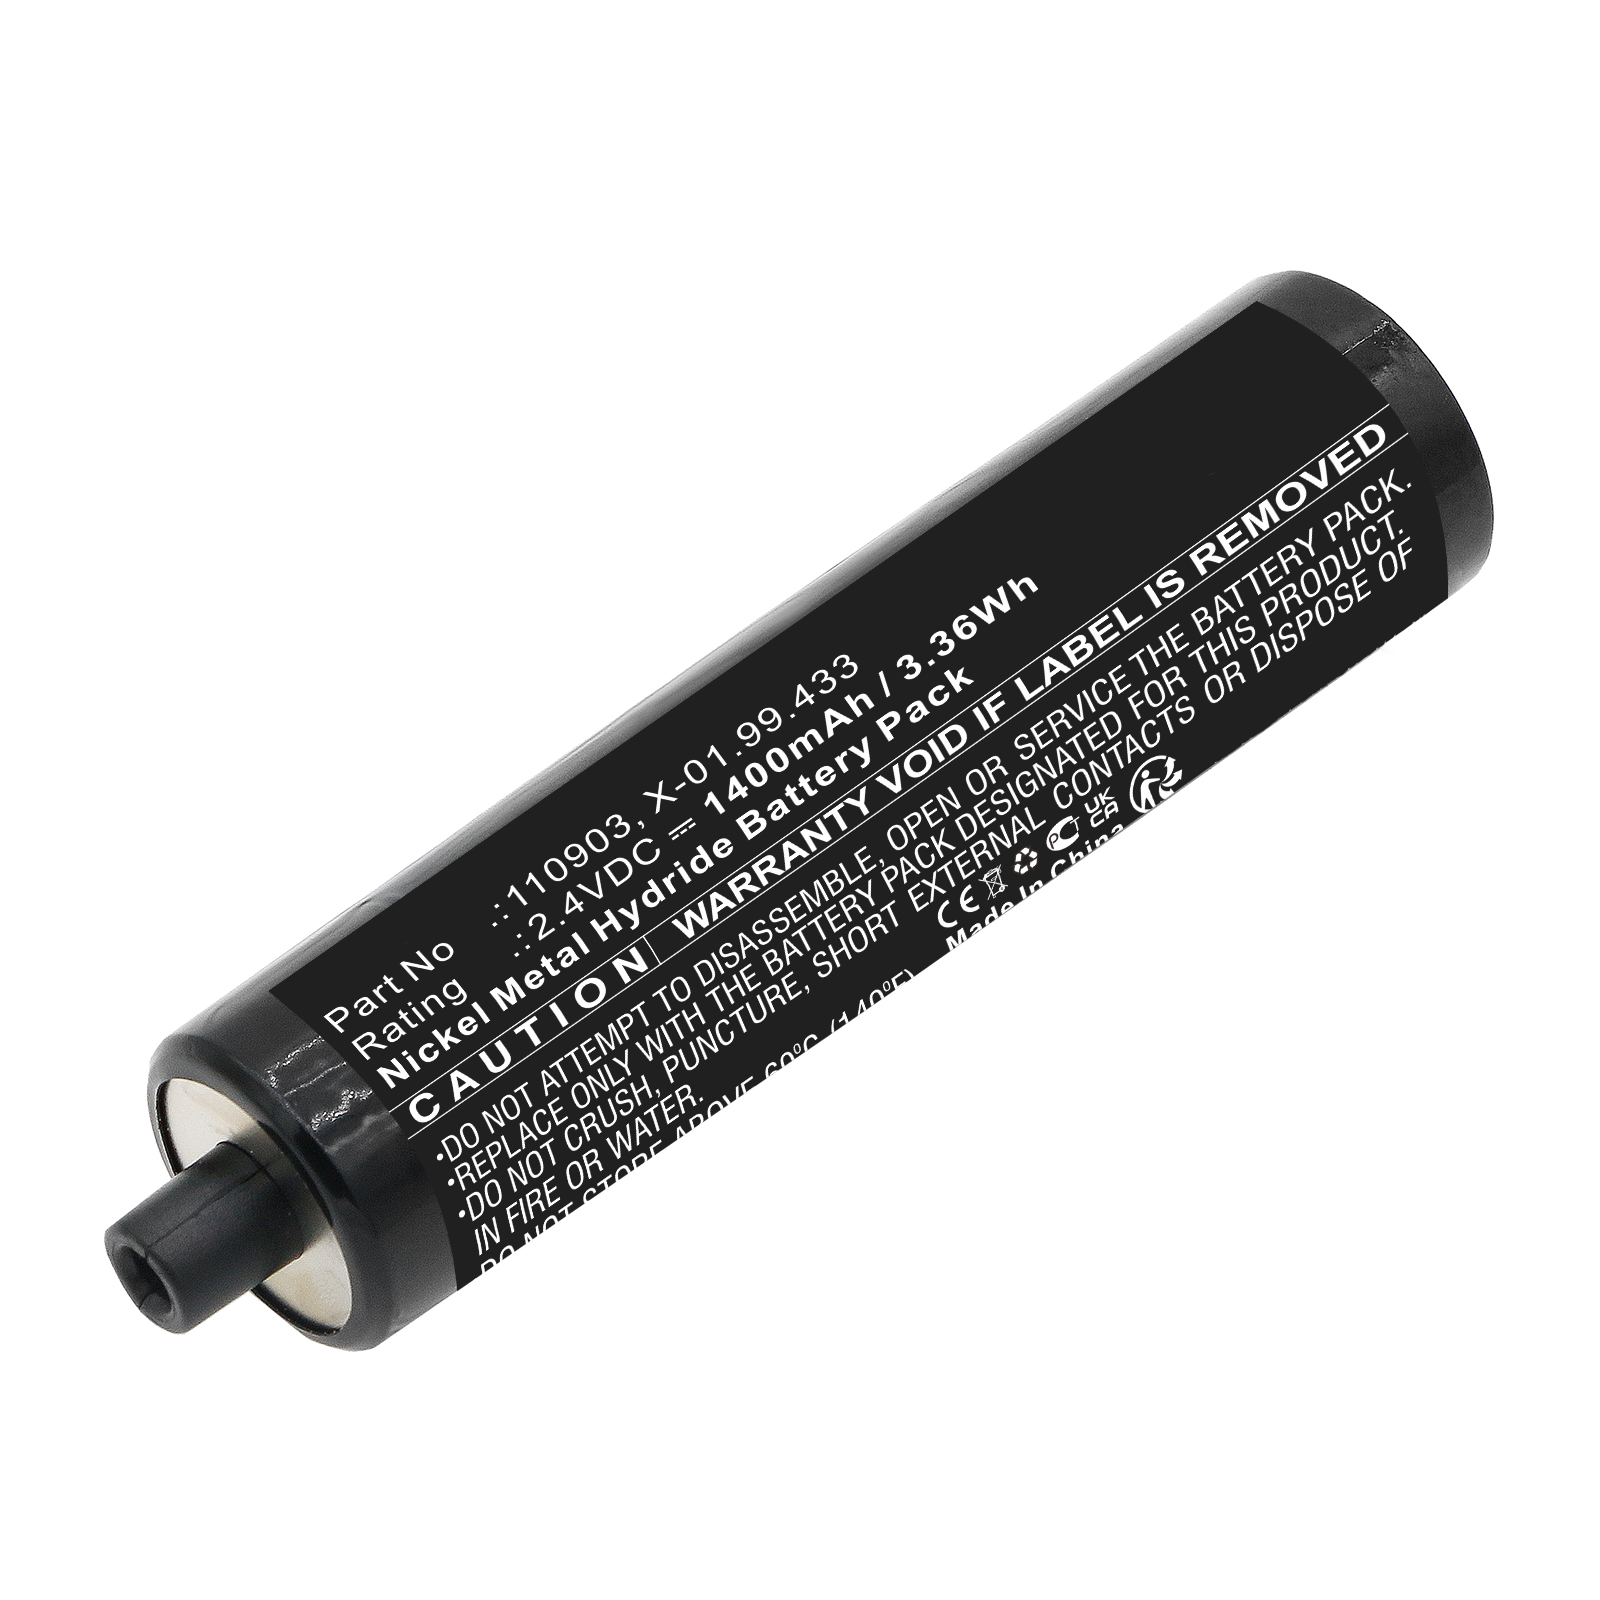 Synergy Digital Medical Battery, Compatible with Heine 110903 Medical Battery (Ni-MH, 2.4V, 1400mAh)